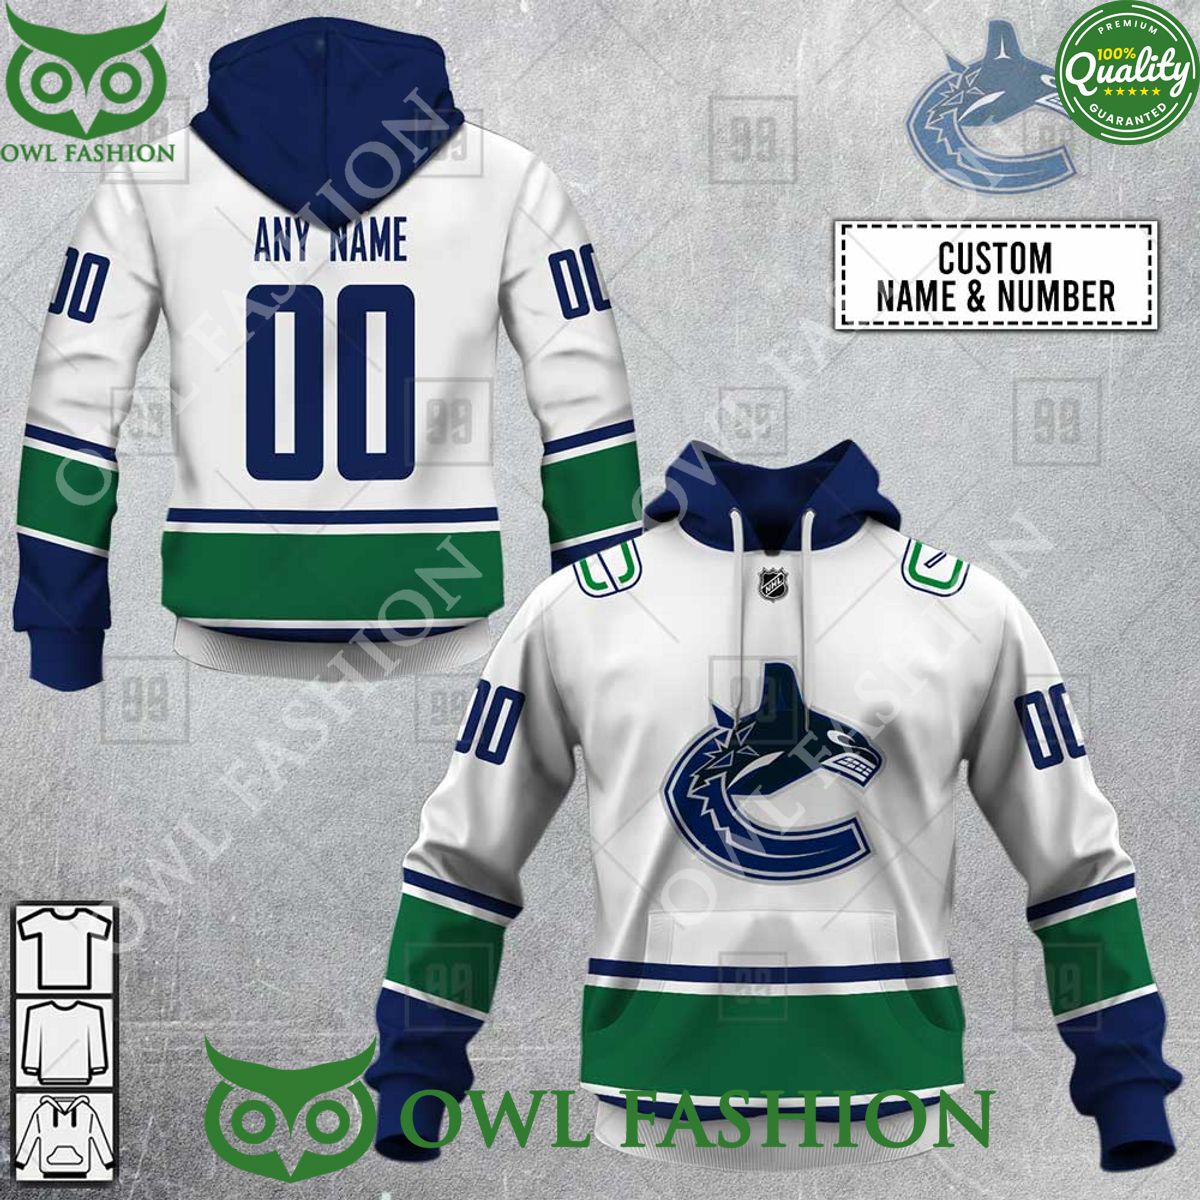 personalized miller nhl vancouver canucks jersey hoodie shirt 1 3wXmU.jpg